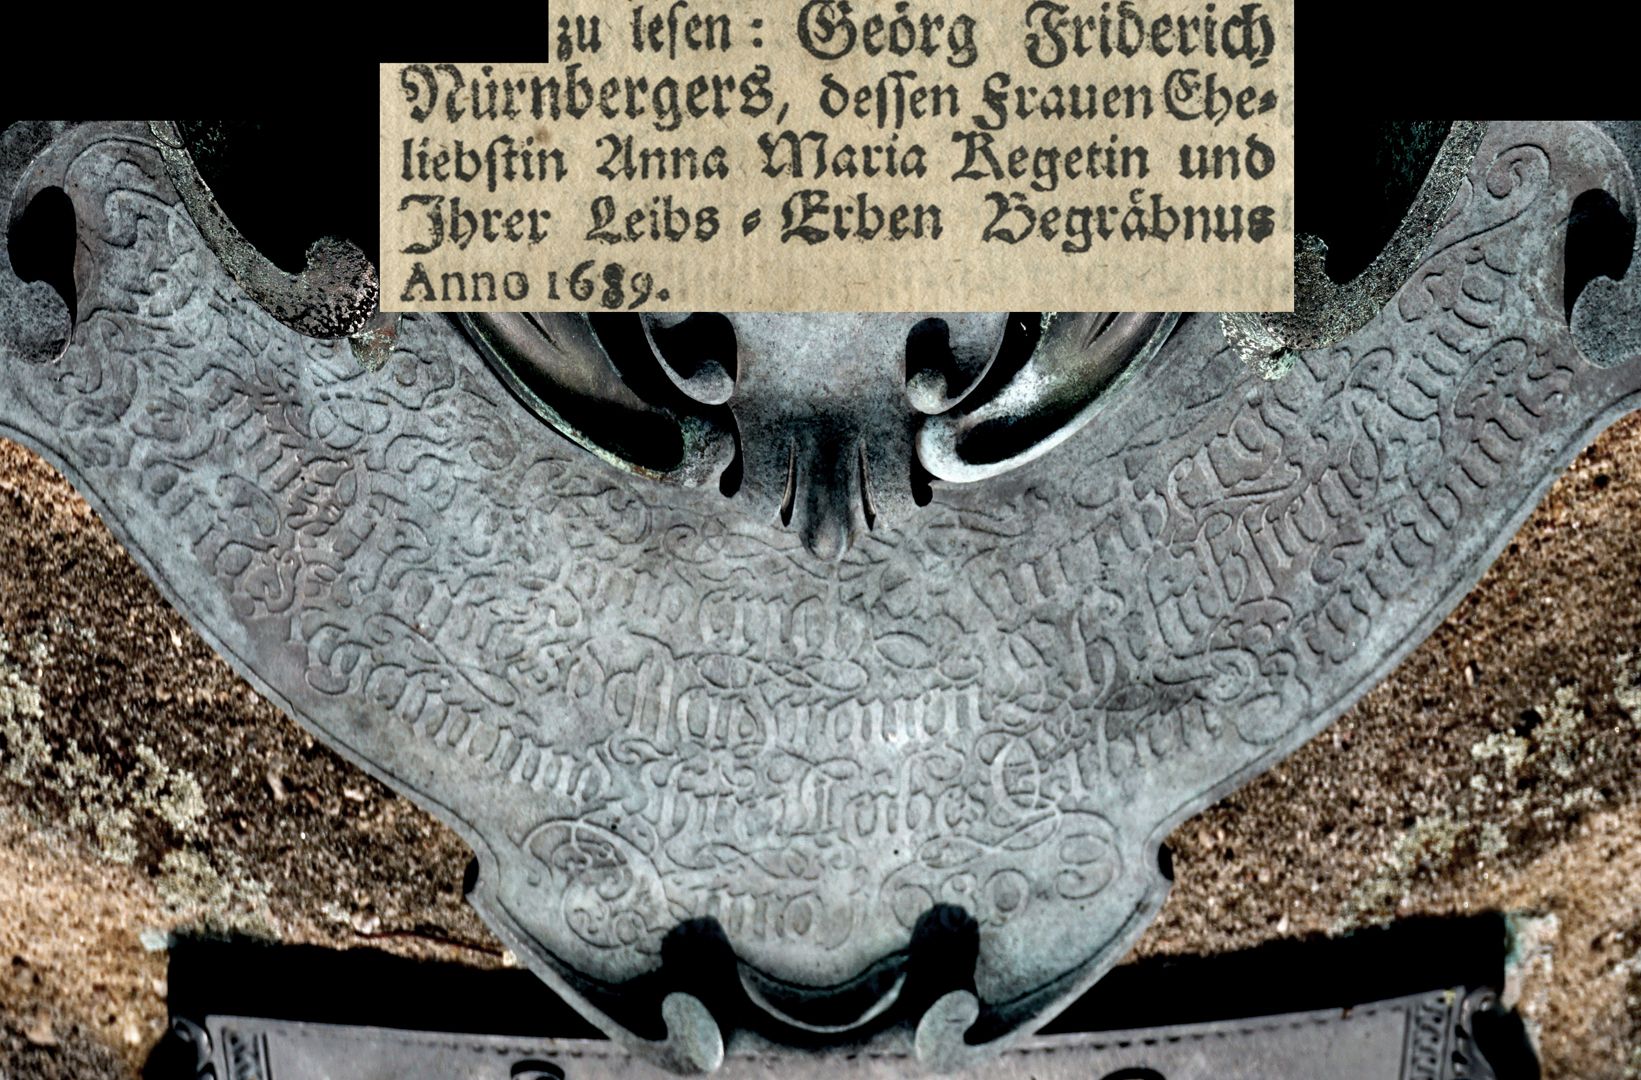 Epitaph of Georg Friederich Nürnberger "Under the coat of arms gives a flying wide note to read":